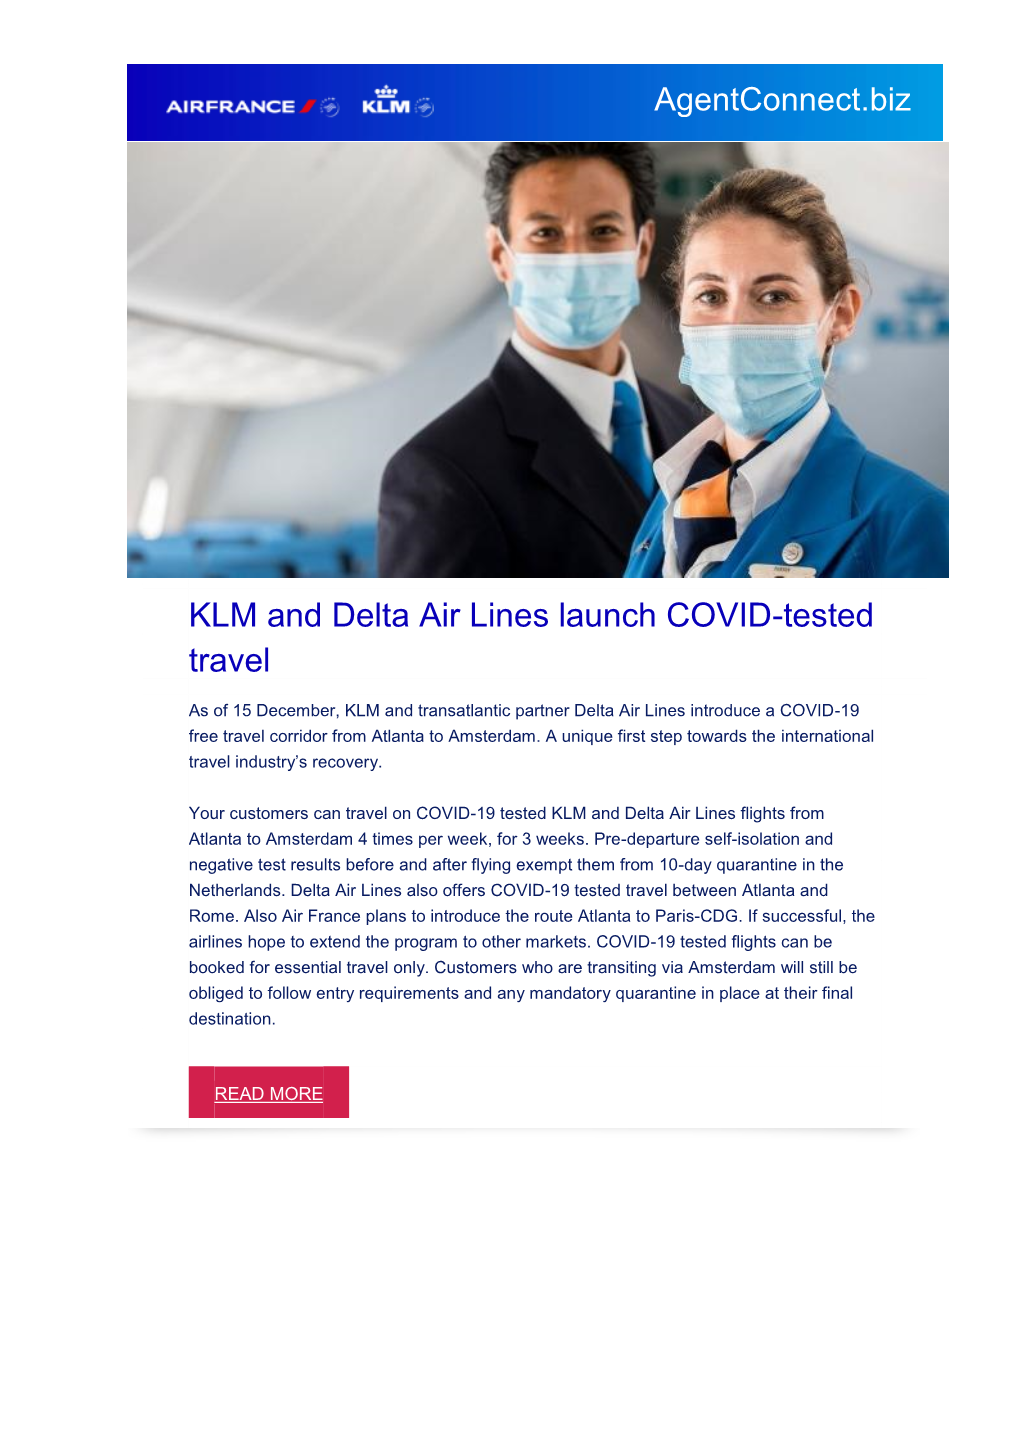 KLM and Delta Air Lines Launch COVID-Tested Travel